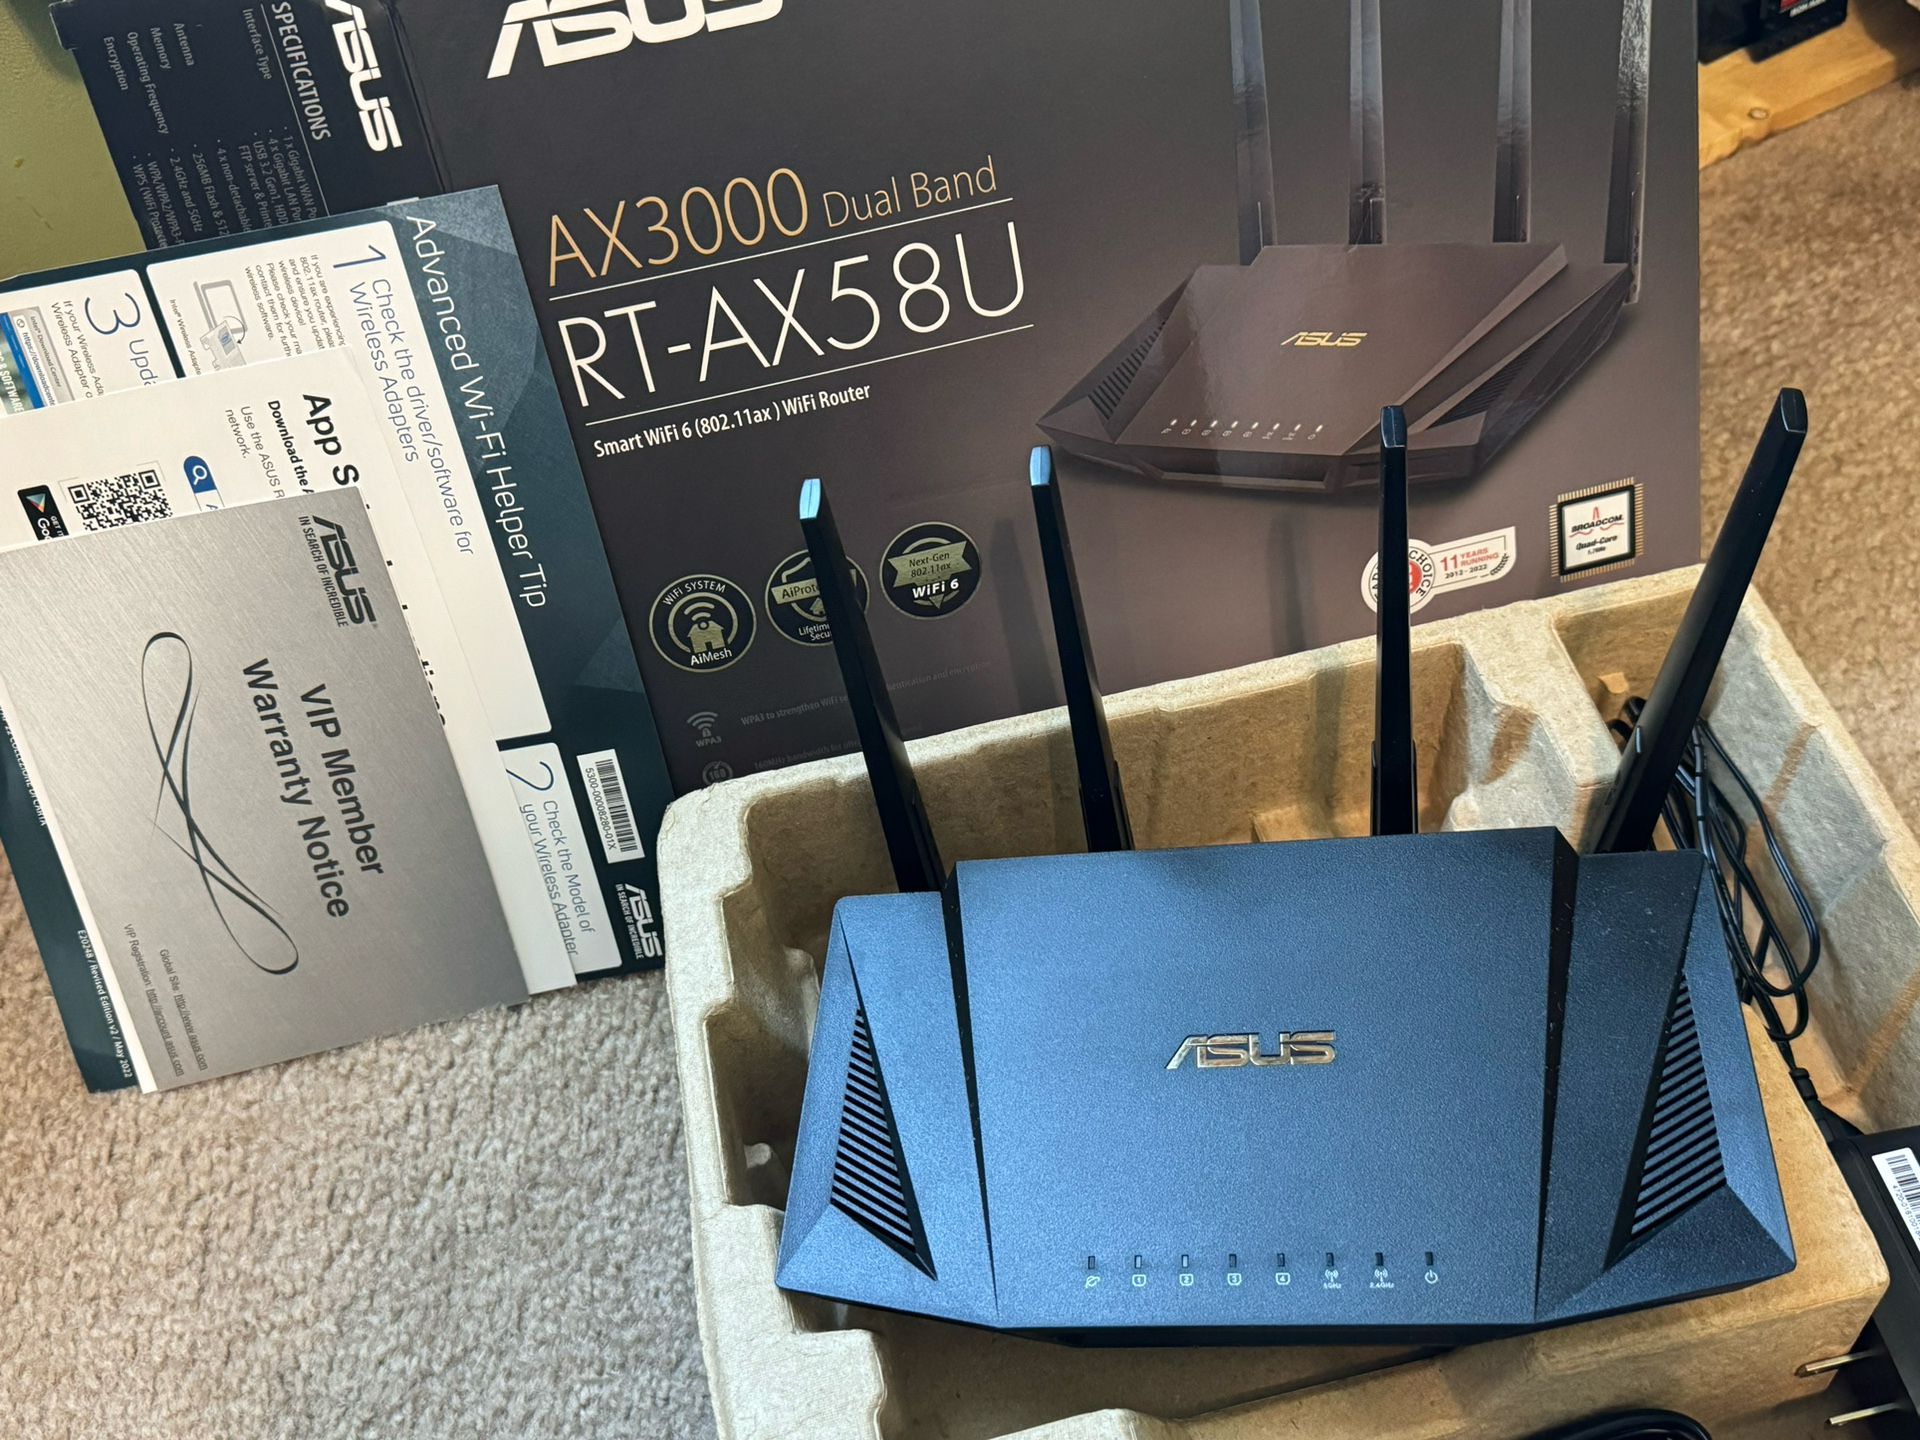 Asus RT-AX58U Smart WiFi 6 Router